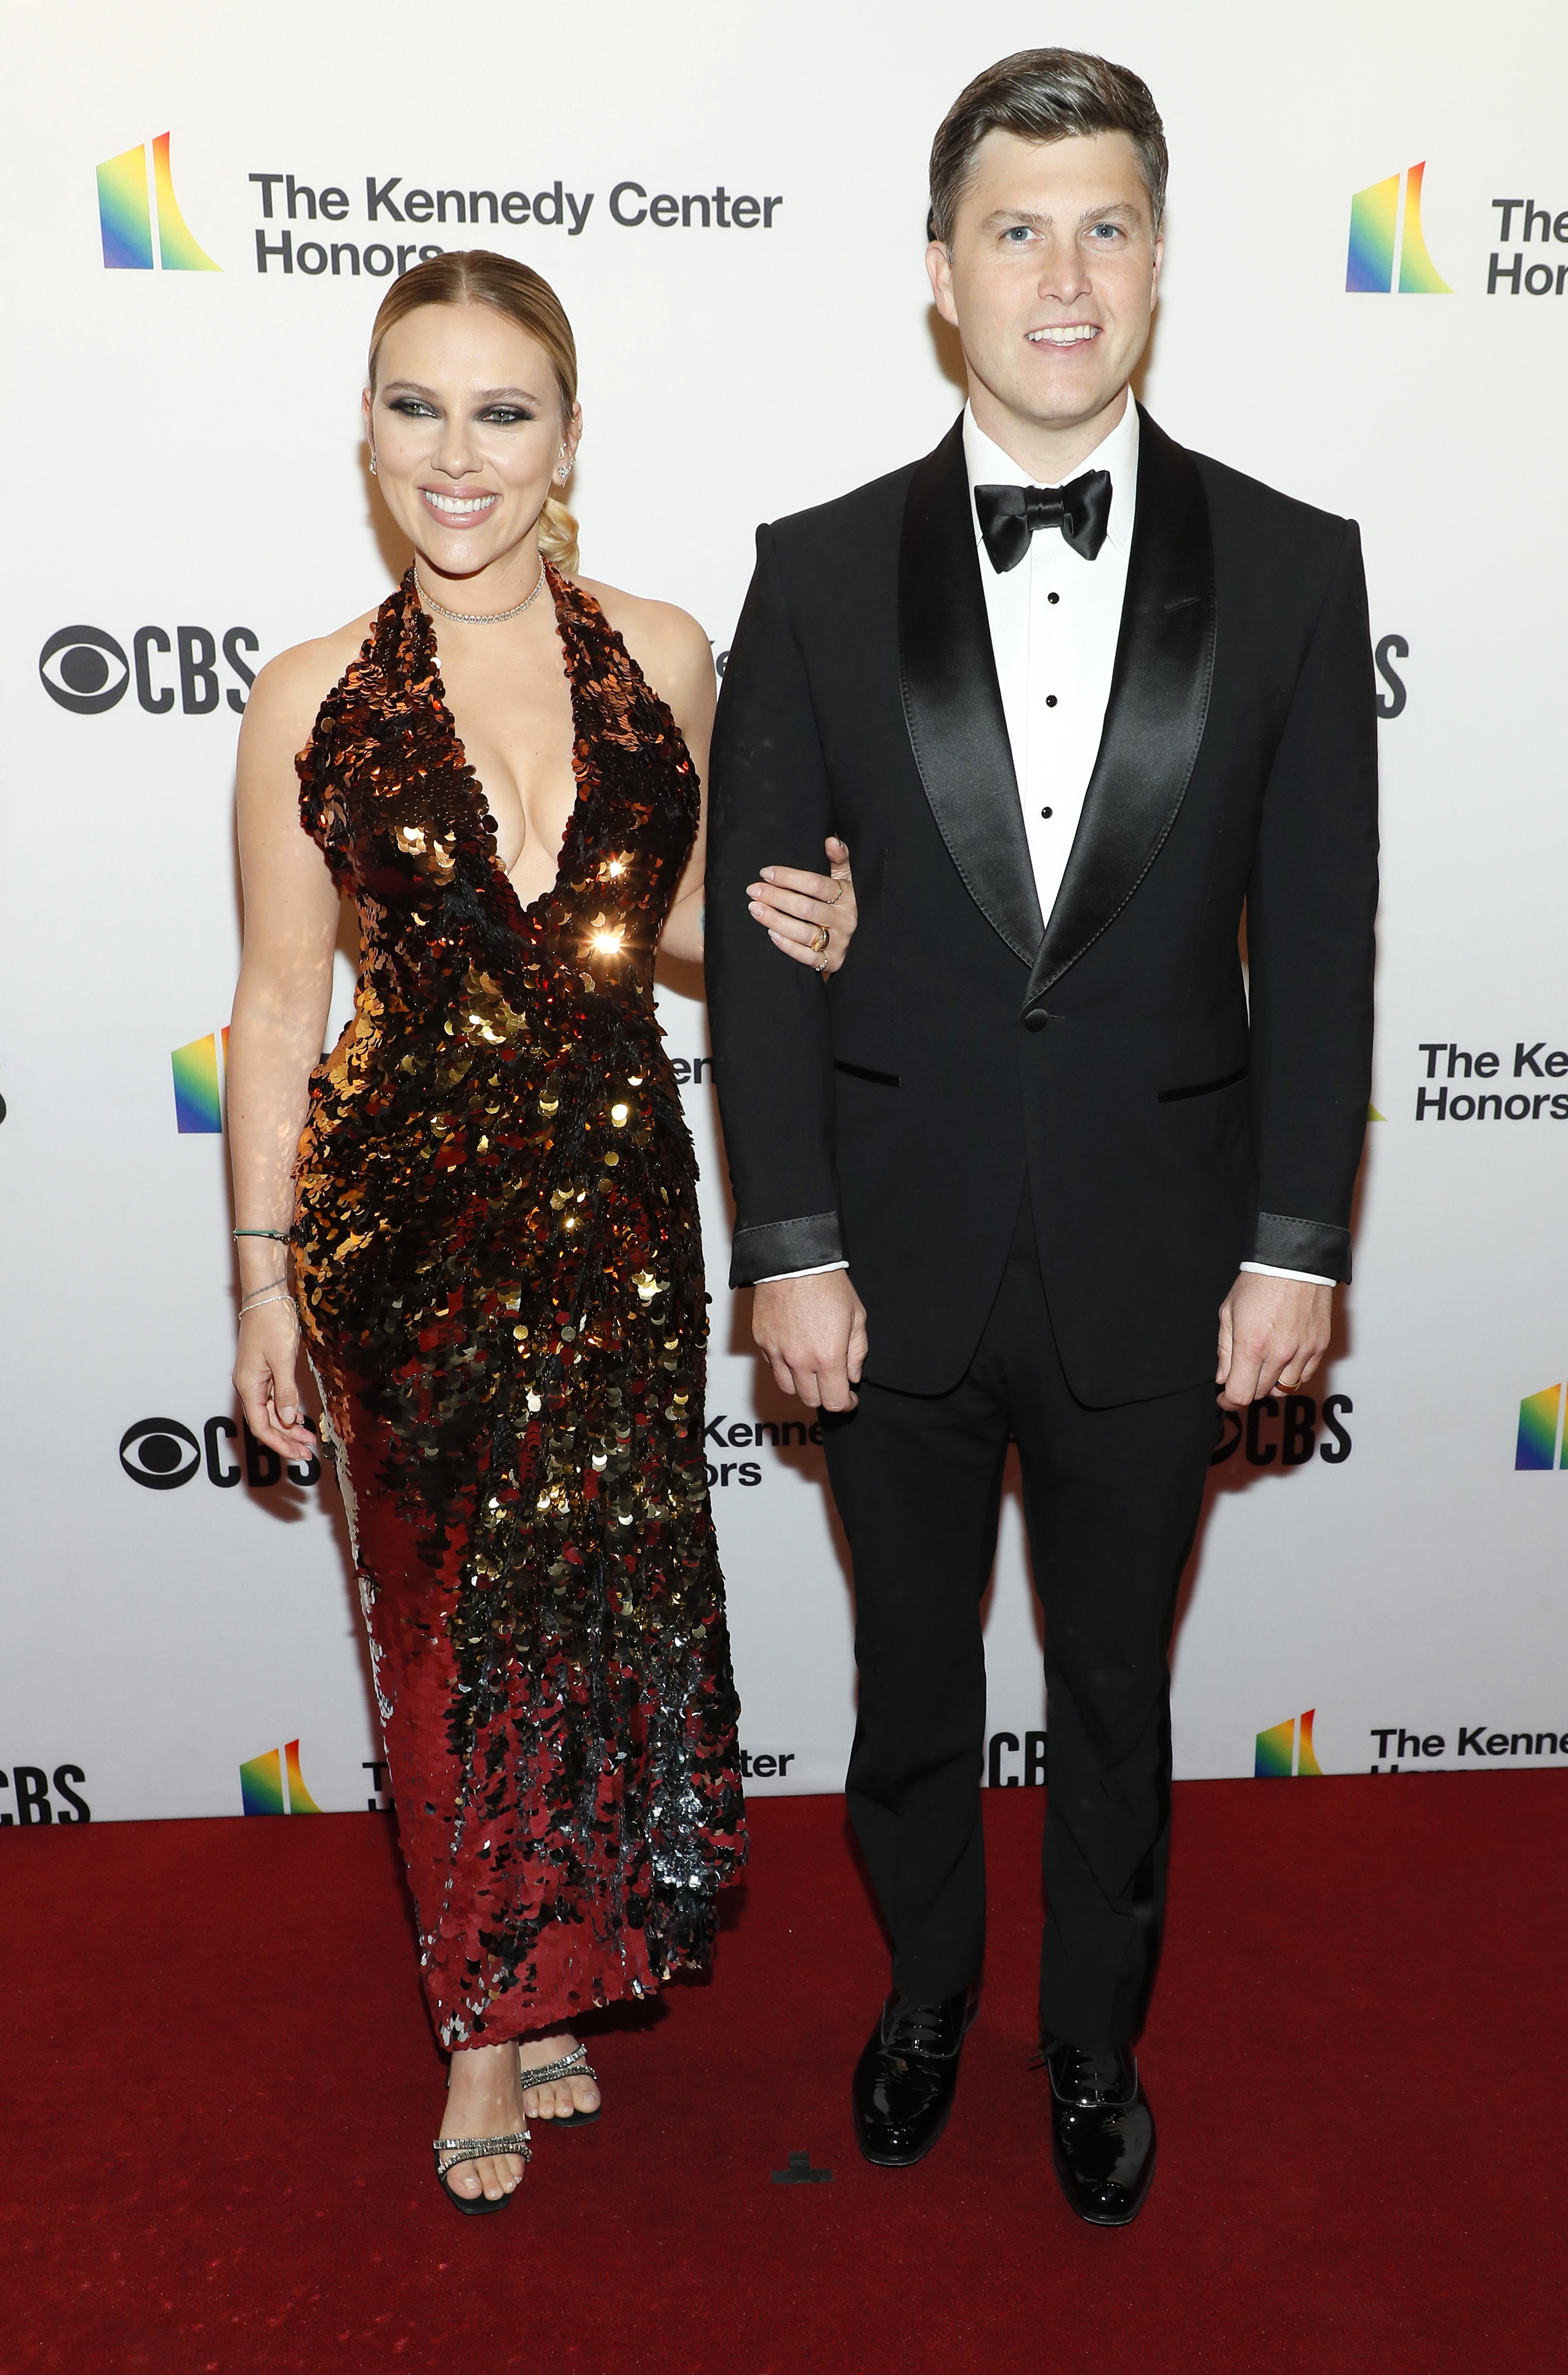 Scarlett Johansson and Colin Jost attend the 44th Kennedy Center Honors at The Kennedy Center on December 05, 2021 in Washington, DC